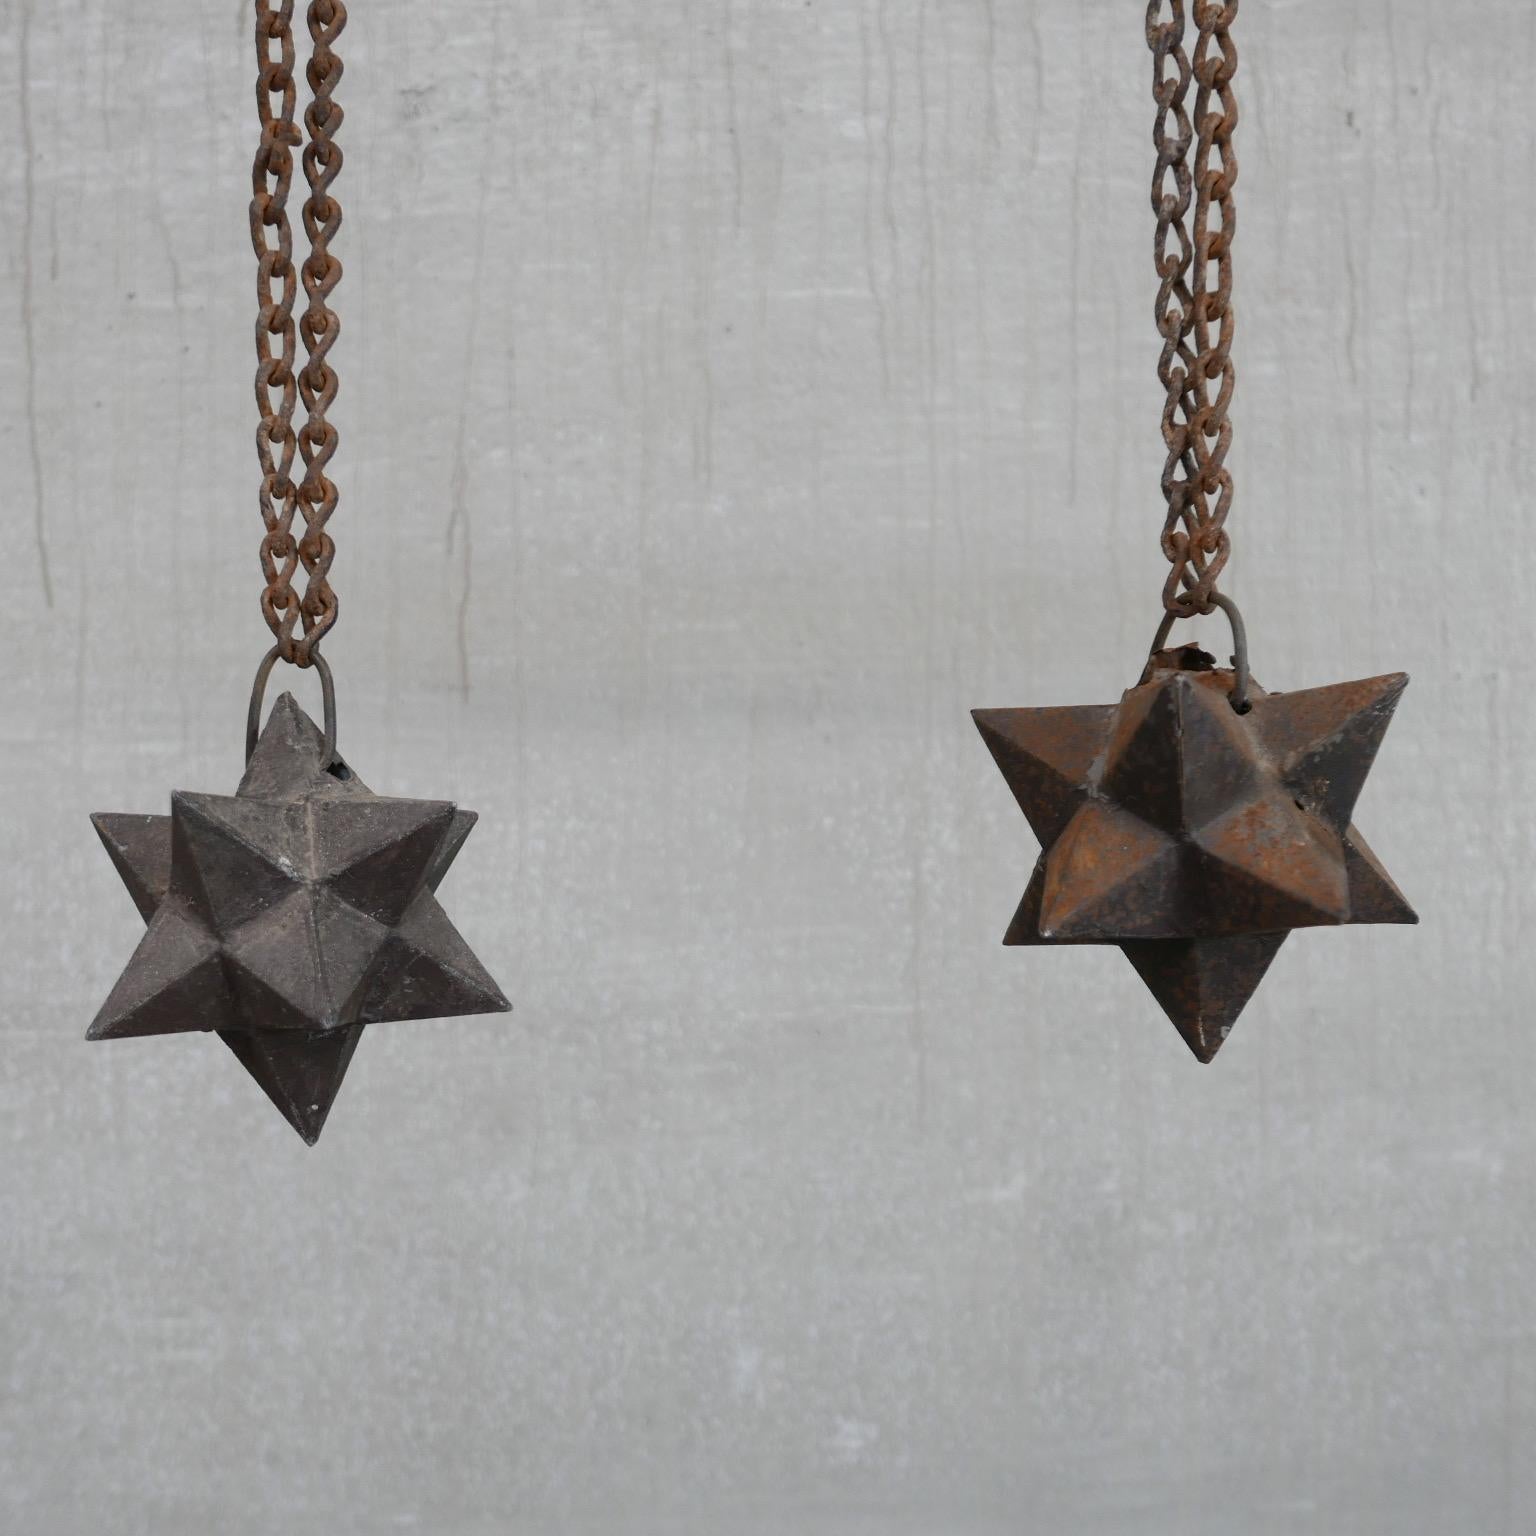 Antique French Cast Iron Geometric 'Etoile' Star Curios For Sale 1